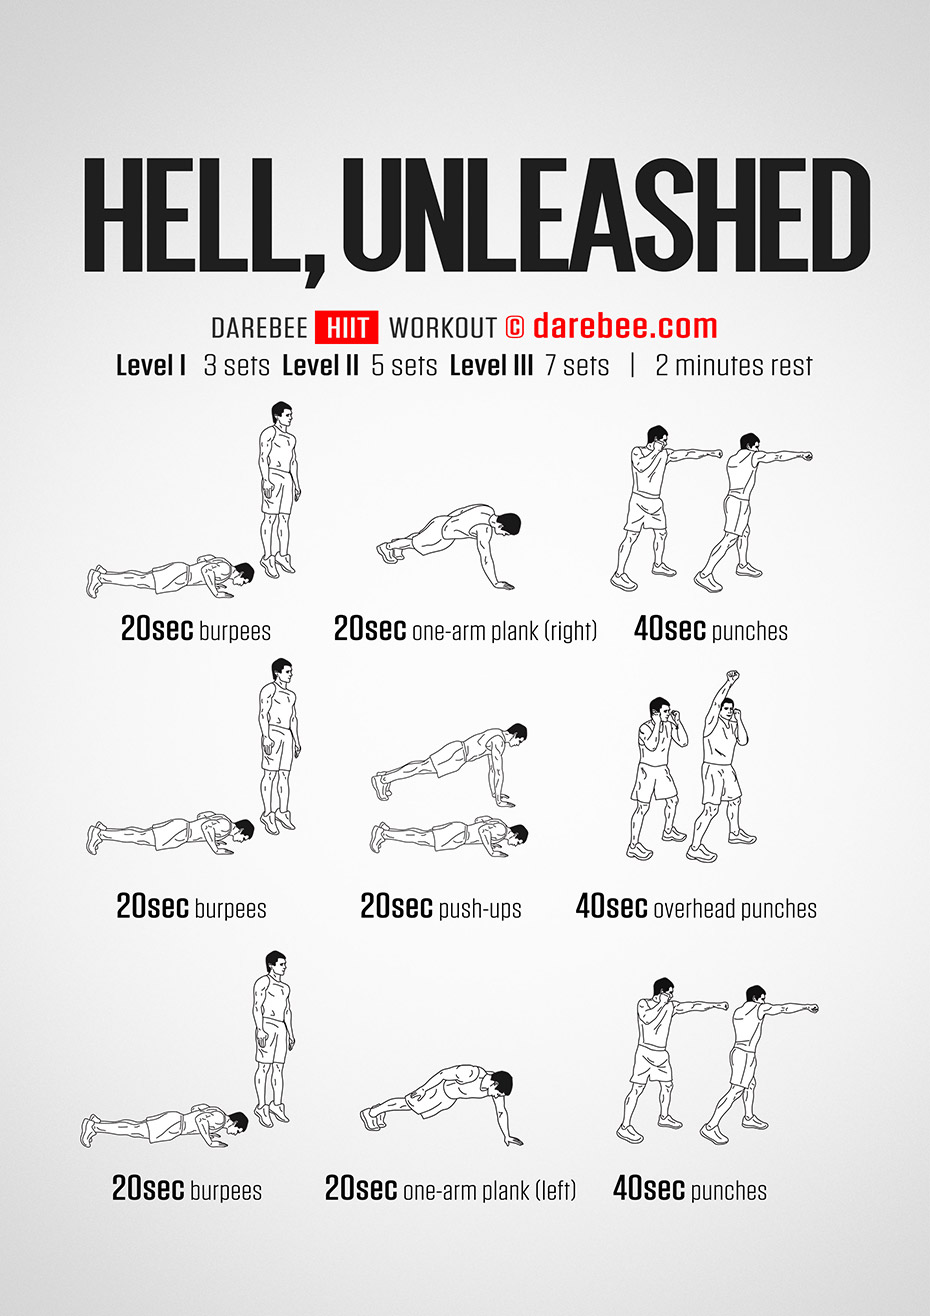 Hell, Unleashed Workout